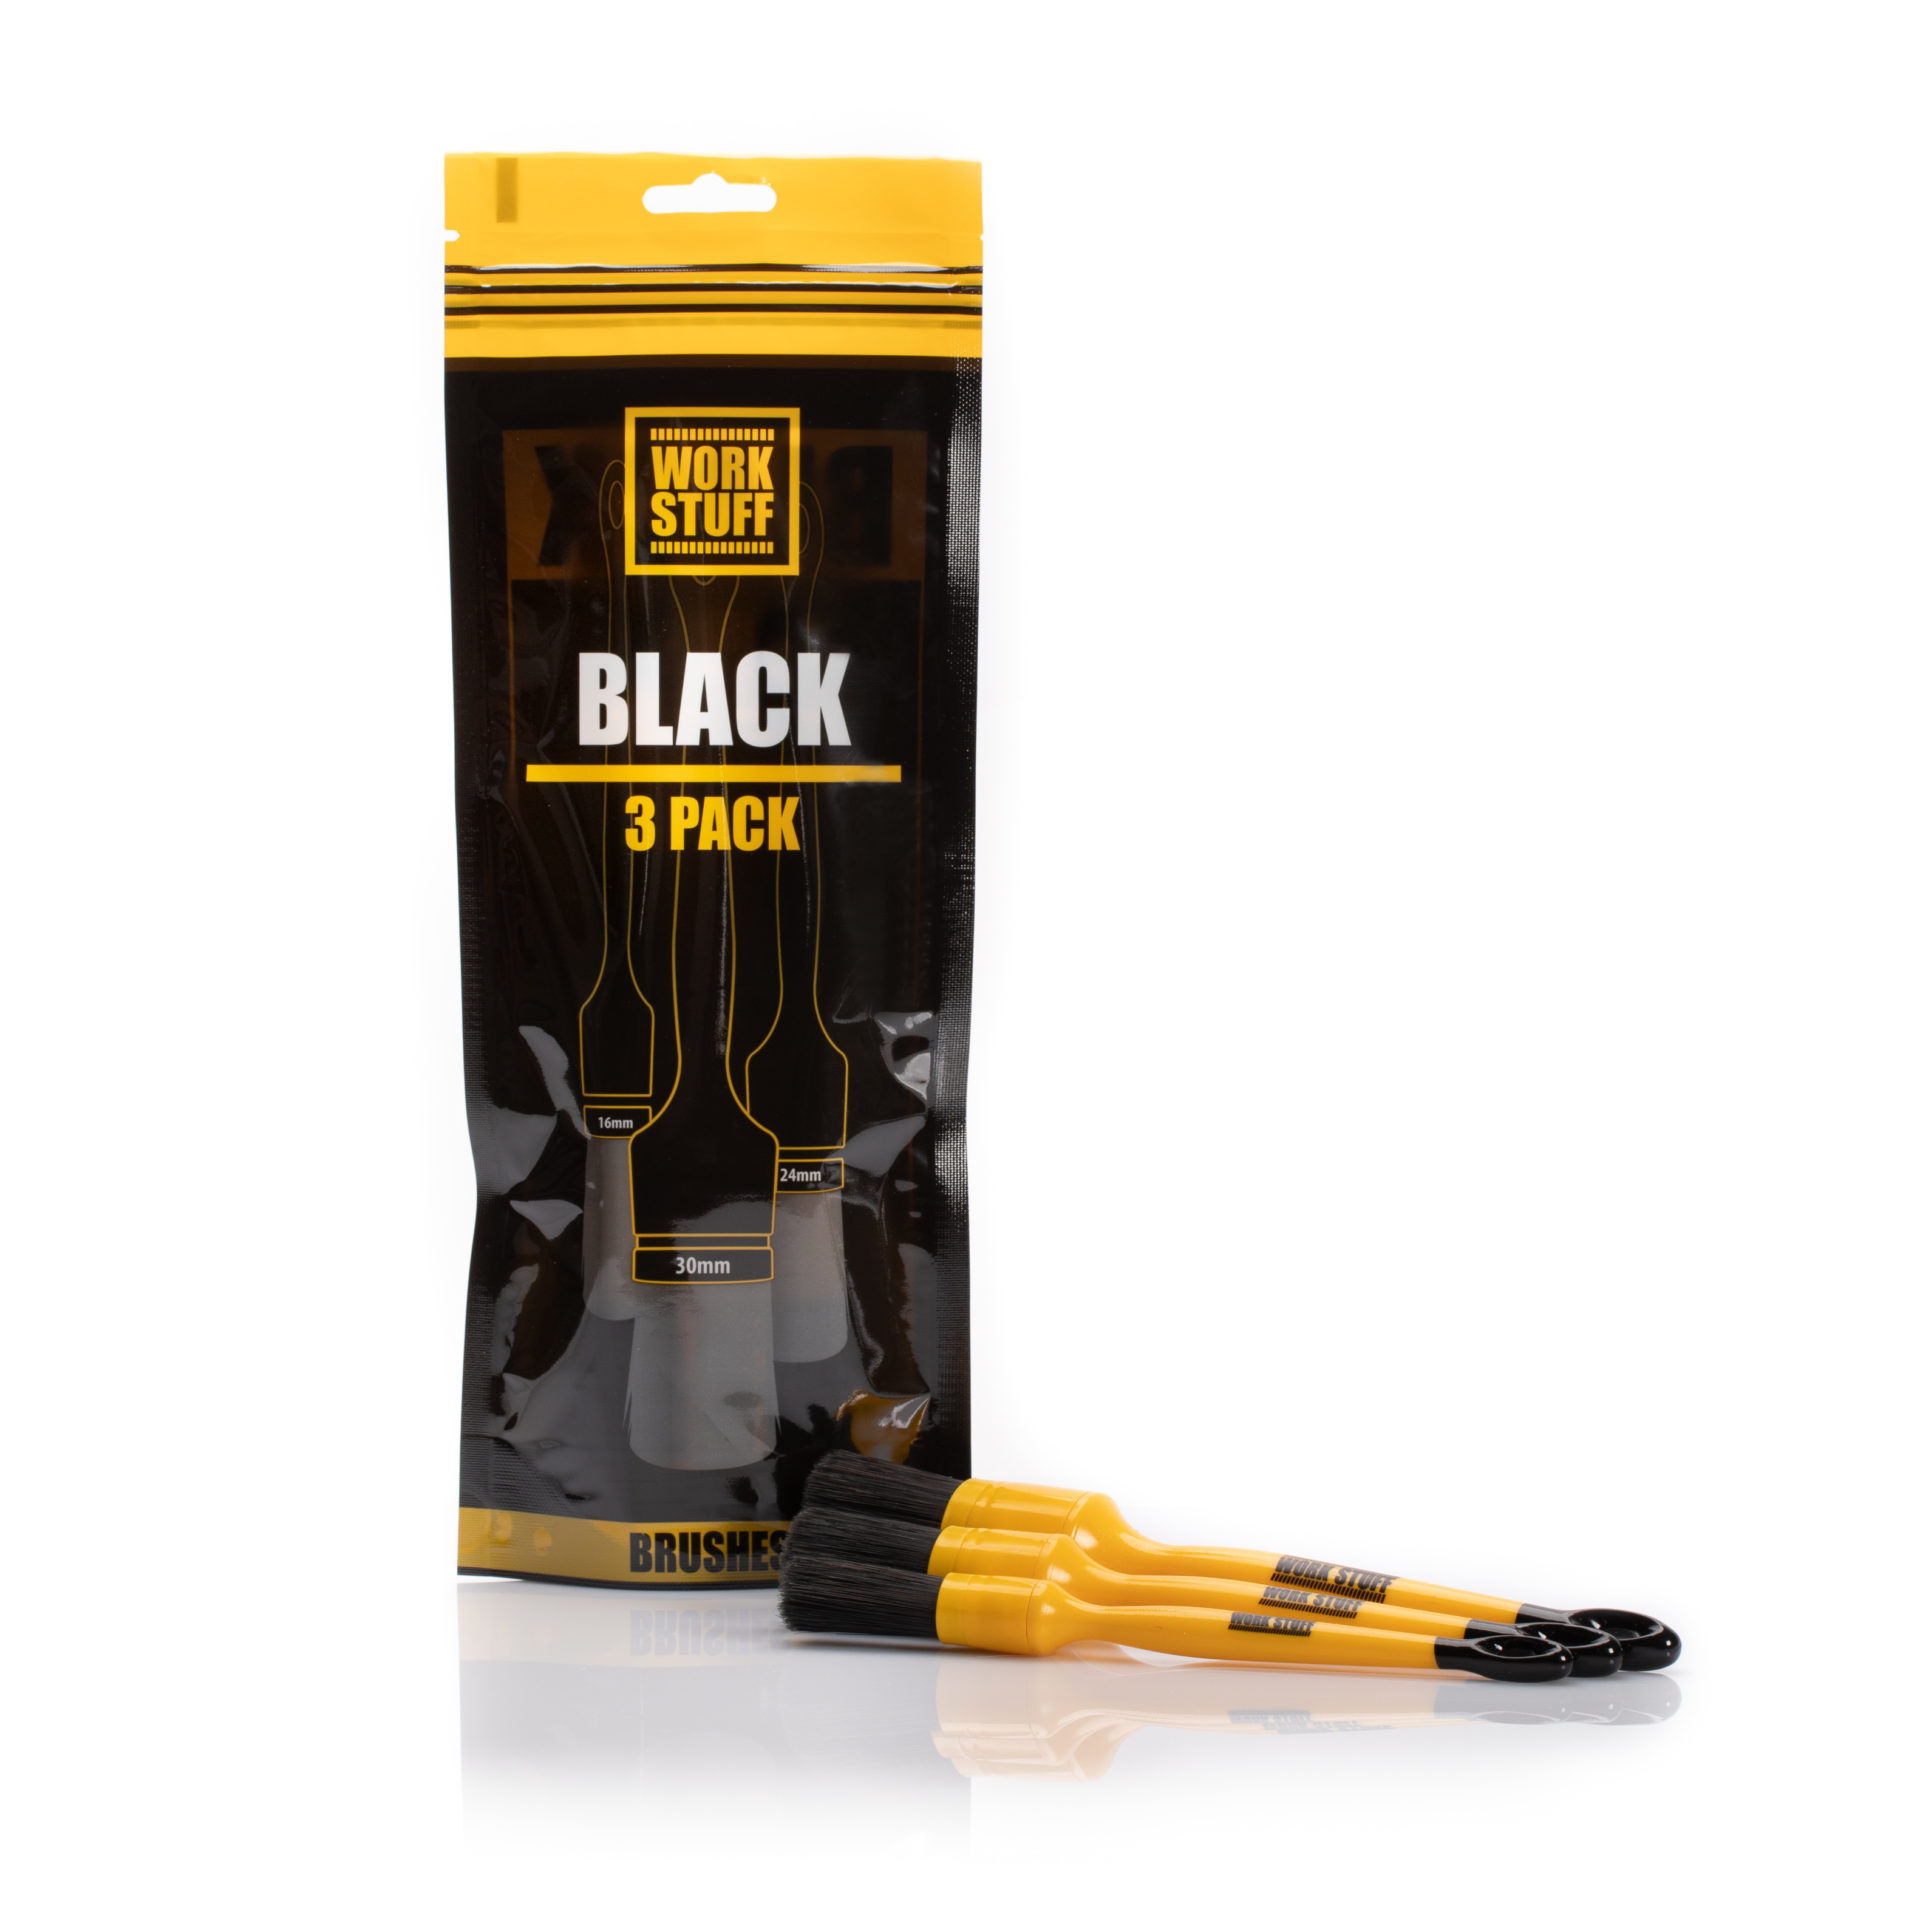 Easily clean hard-to-reach areas with the Work Stuff Detailing Brush BLACK 3-pack set. These brushes feature high cleaning power and are perfect for cleaning rims, sills, and engine bay.